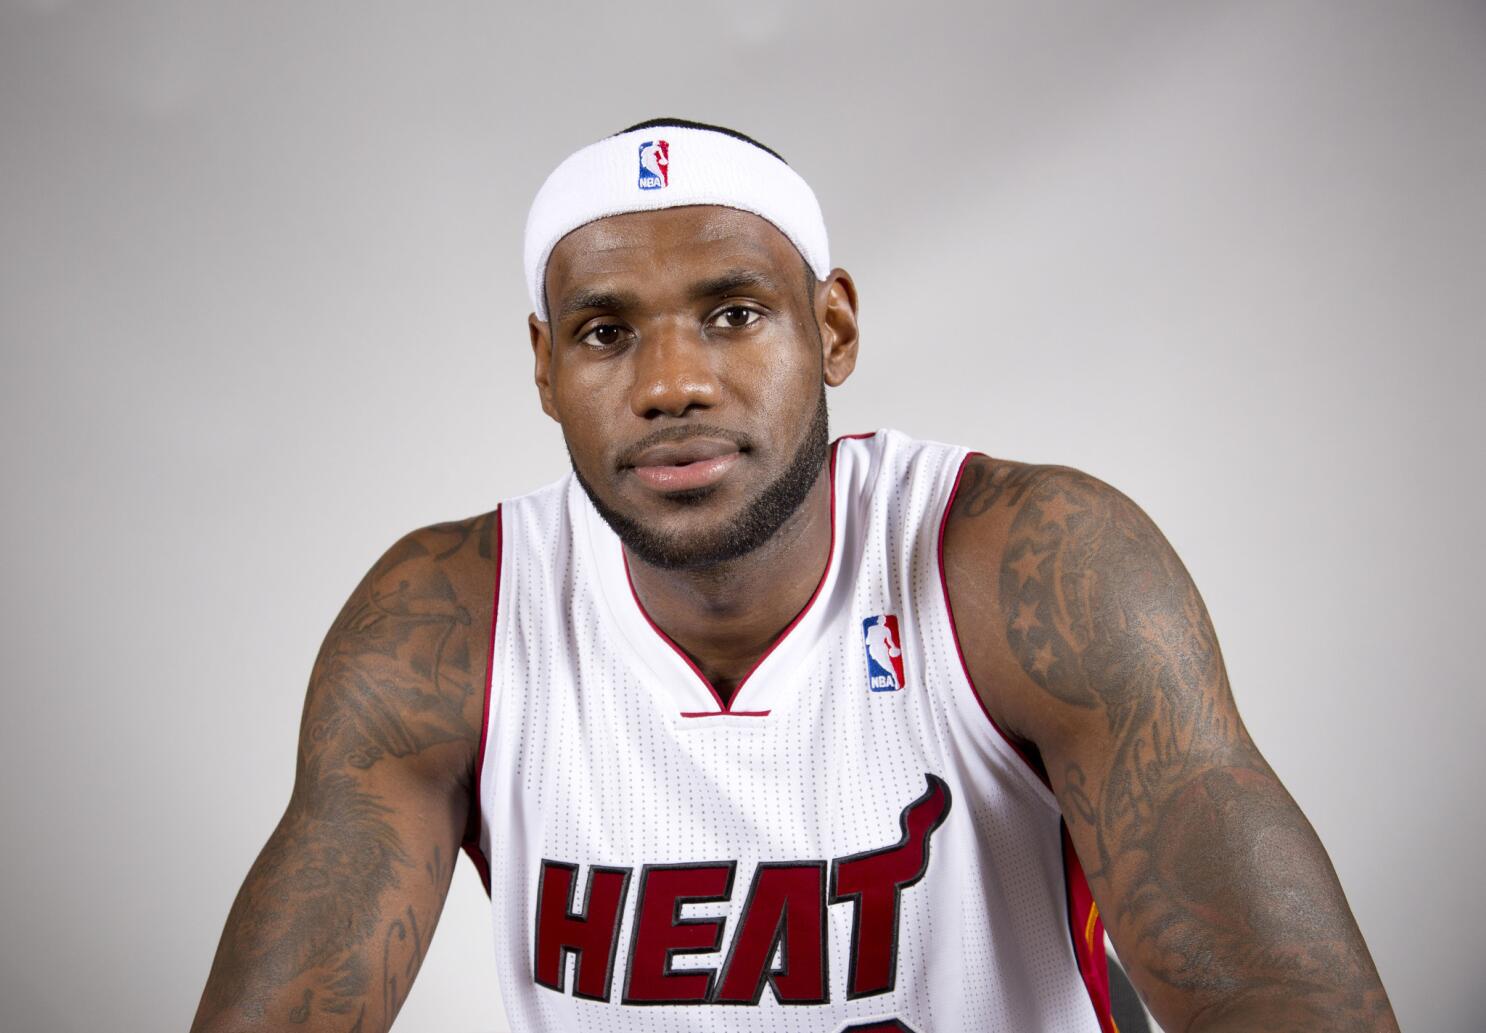 LeBron James tells Heat he will become free agent